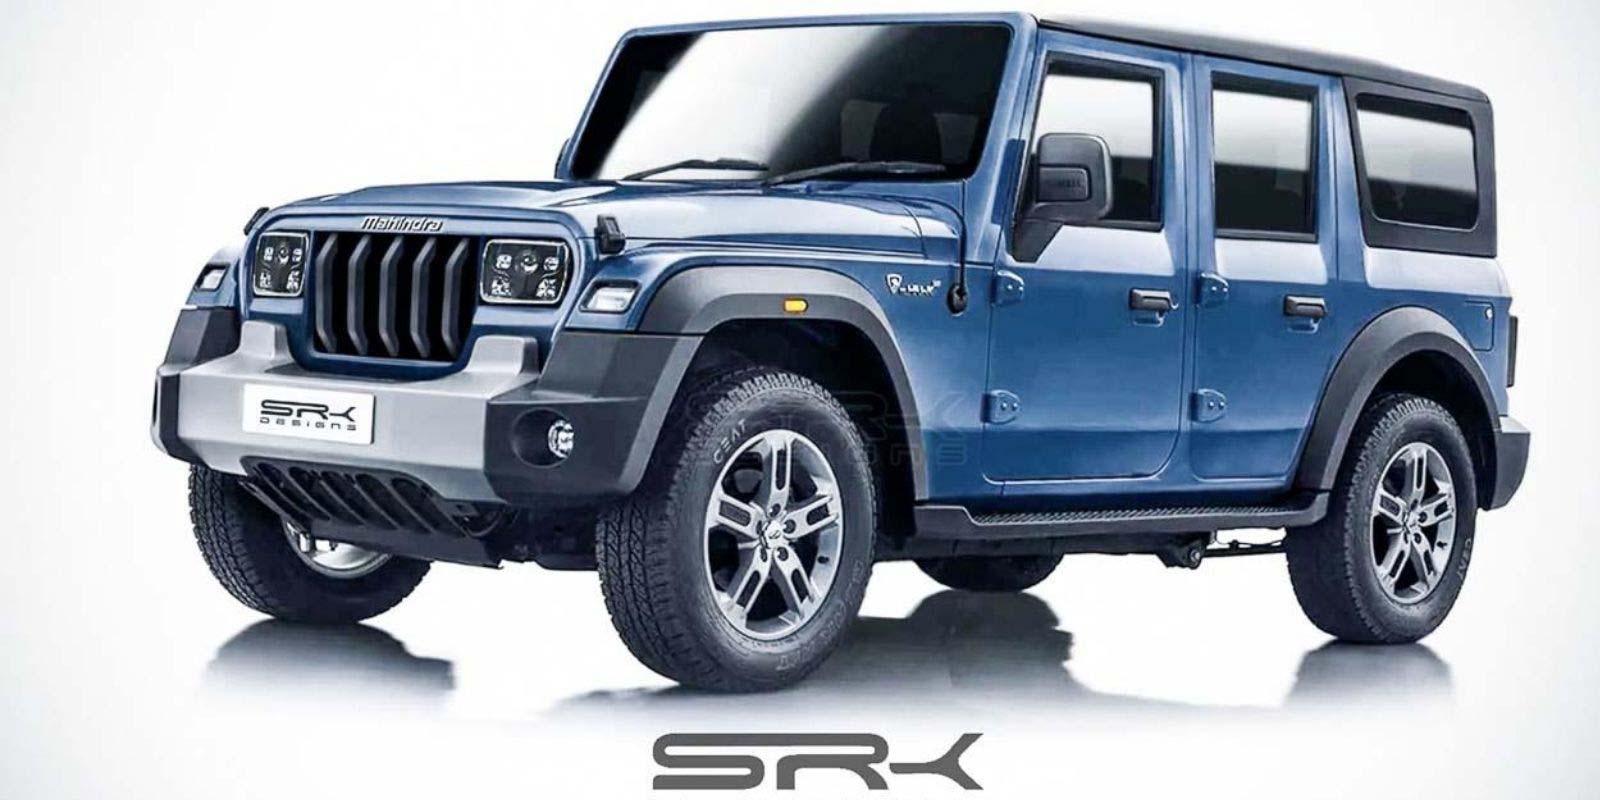 Mahindra Thar Five-Door Version Being Considered For Launch - Report